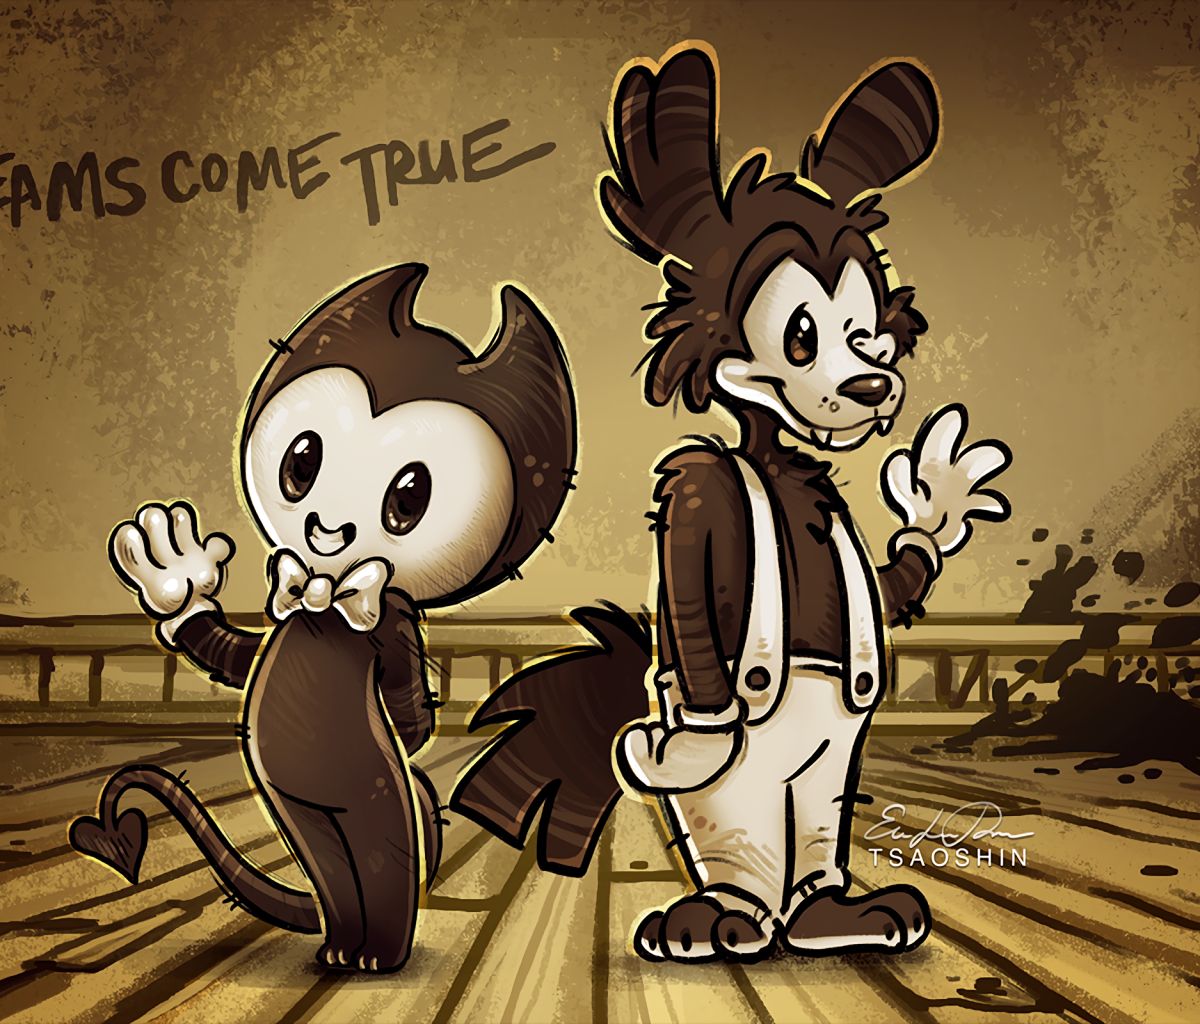 bendy (bendy and the ink machine), video game, bendy and the ink machine, boris (bendy and the ink machine)